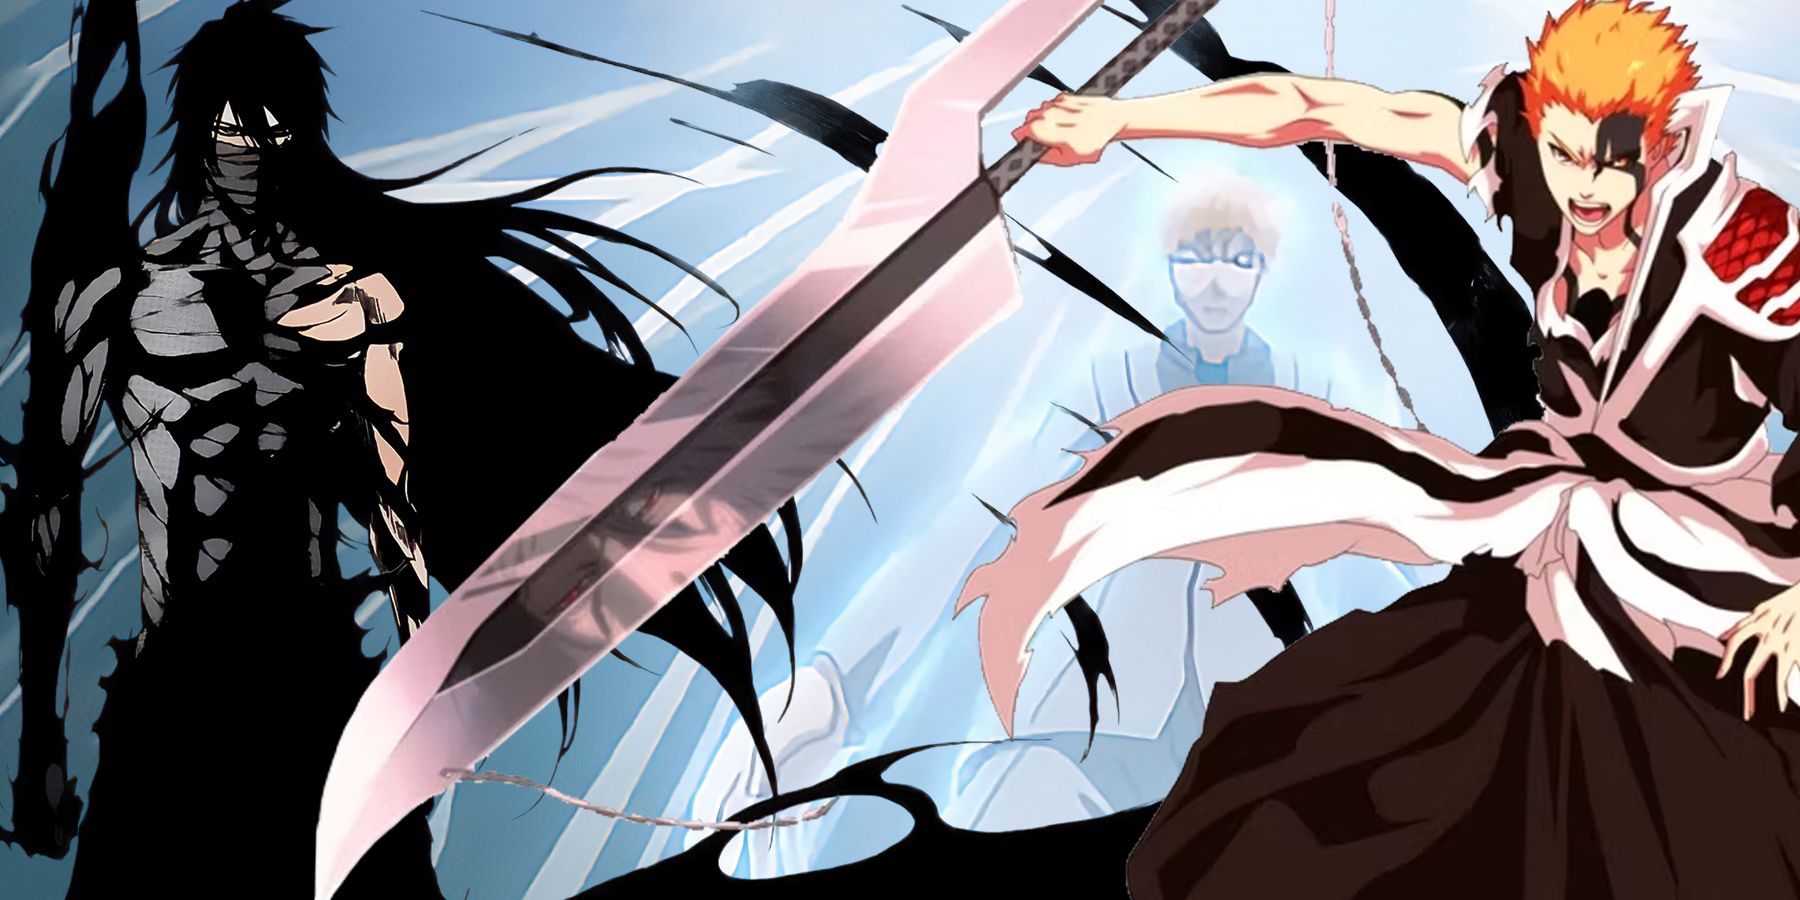 5 Things The Bleach Anime Does Better Than The Manga